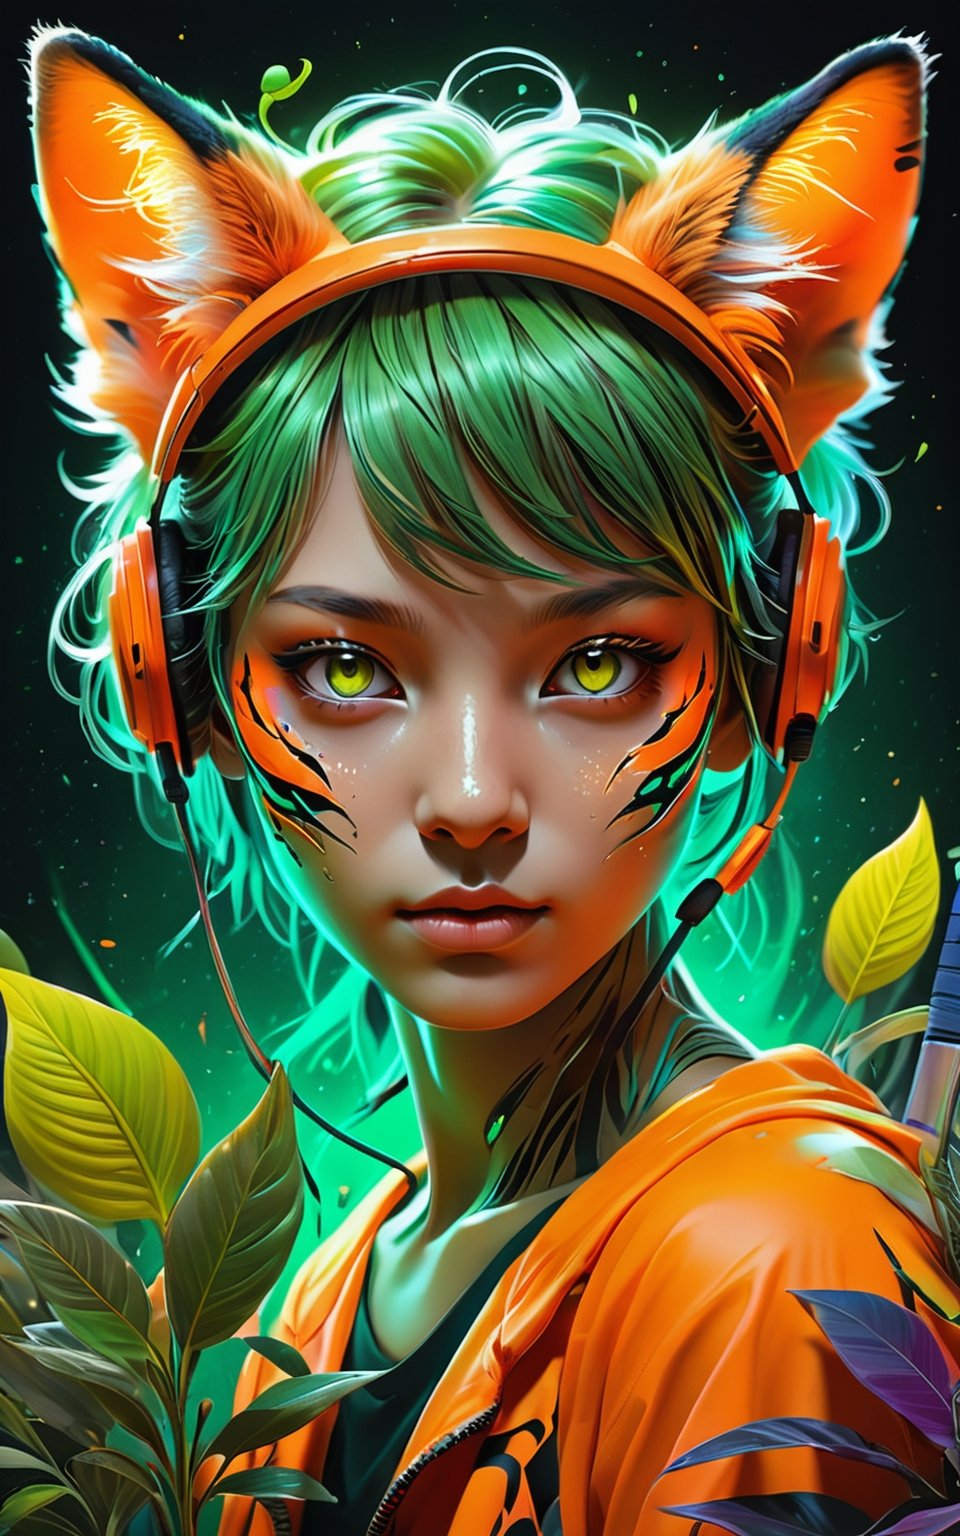 (masterpiece:1.1), (highest quality:1.1), (HDR:1.0), extreme quality, cg, (negative space), detailed face+eyes, 1girl, fox ears, (plants:1.18), (fractal art), (bright colors), splashes of color background, colors mashing, paint splatter, complimentary colors, neon, (tiger tennis player), compassionate, electric, limited palette, synthwave, fine art, tan skin, full body, (green and orange:1.2), time stop, sy3, SMM